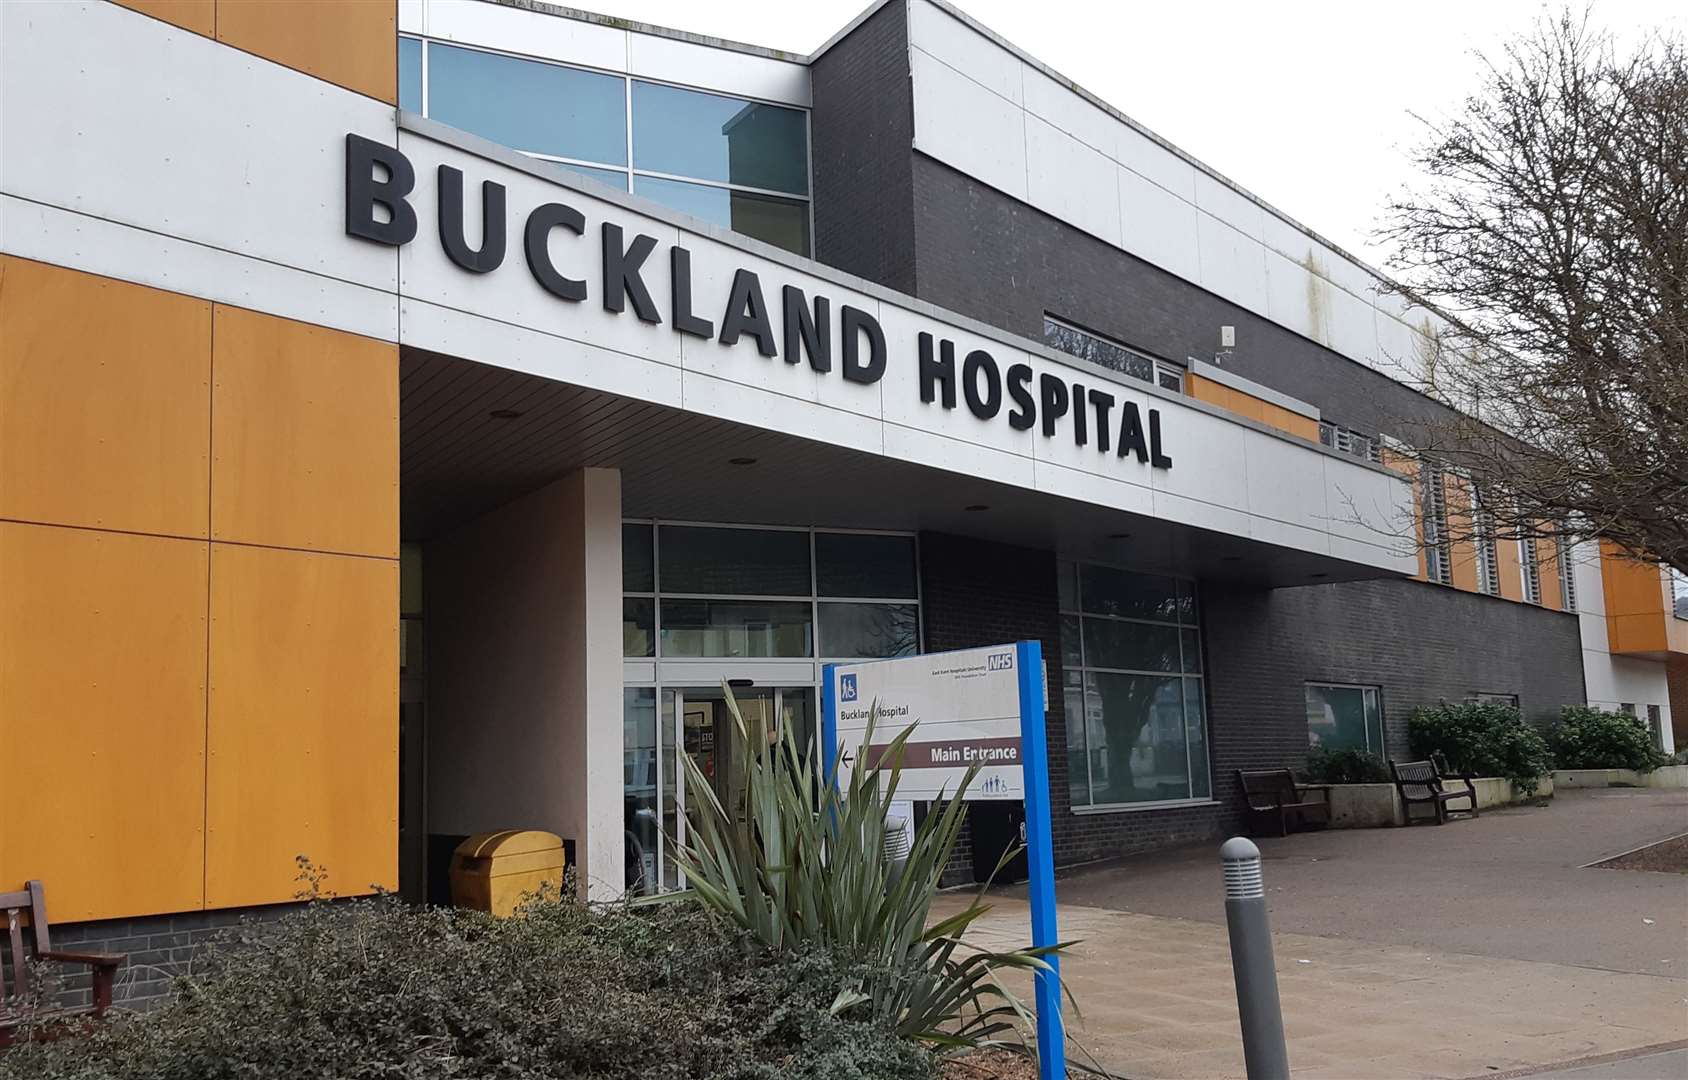 Some visitors to Buckland Hospital are using nearby streets to leave their cars in, rather than the site’s pay-and-display car park